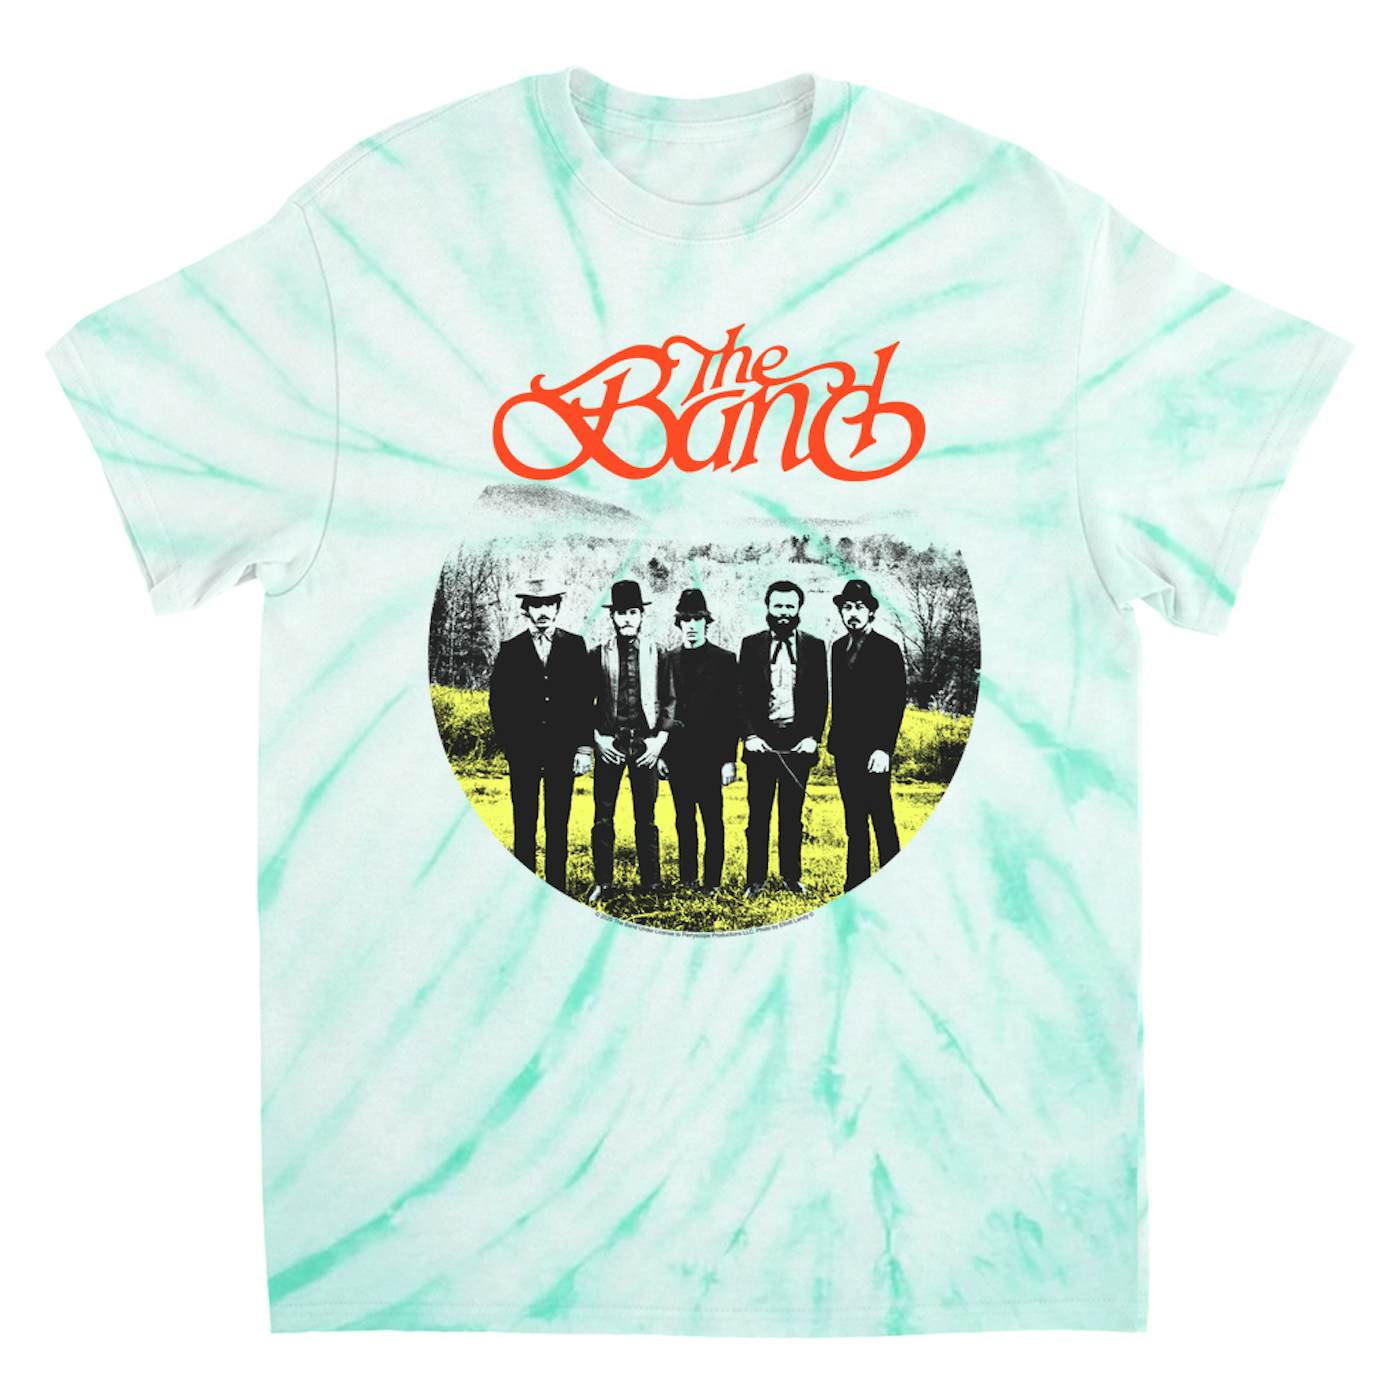 The Band T-Shirt | Group Photo Landscape Design The Band Tie Dye Shirt